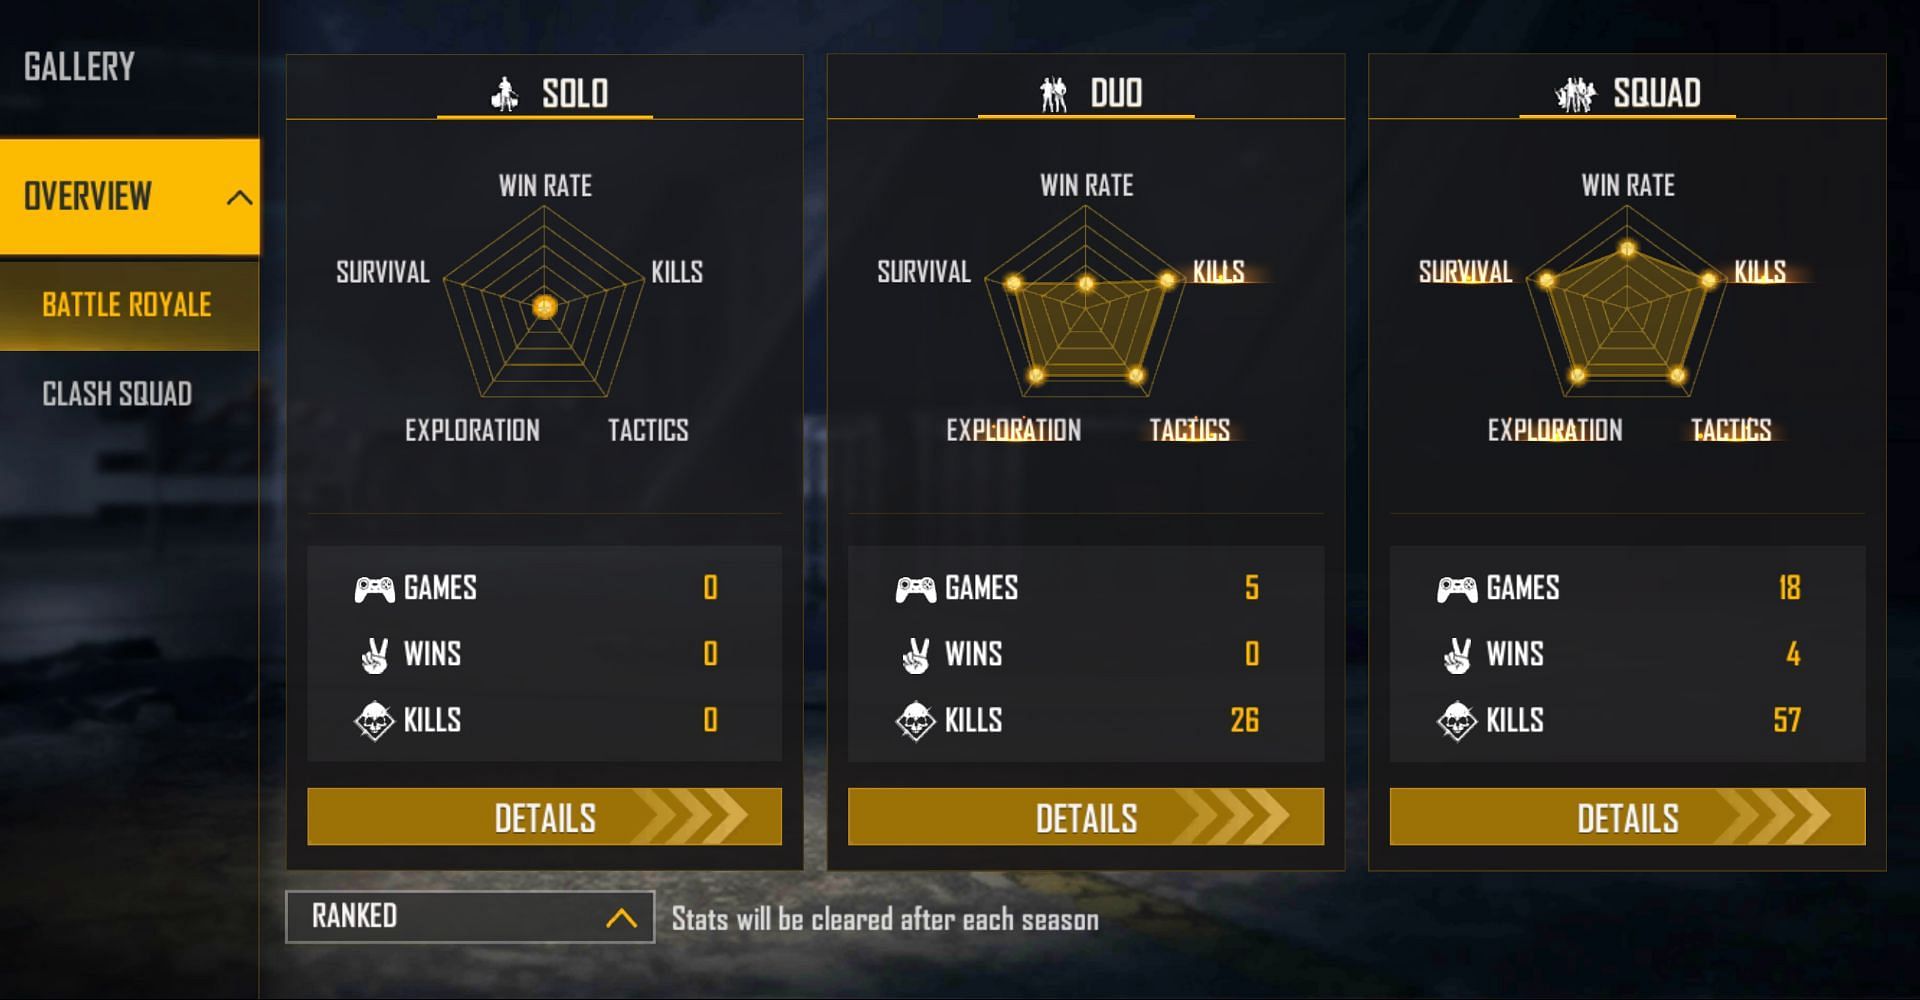 Lokesh Gamer has not participated in solo matches (Image via Free Fire)